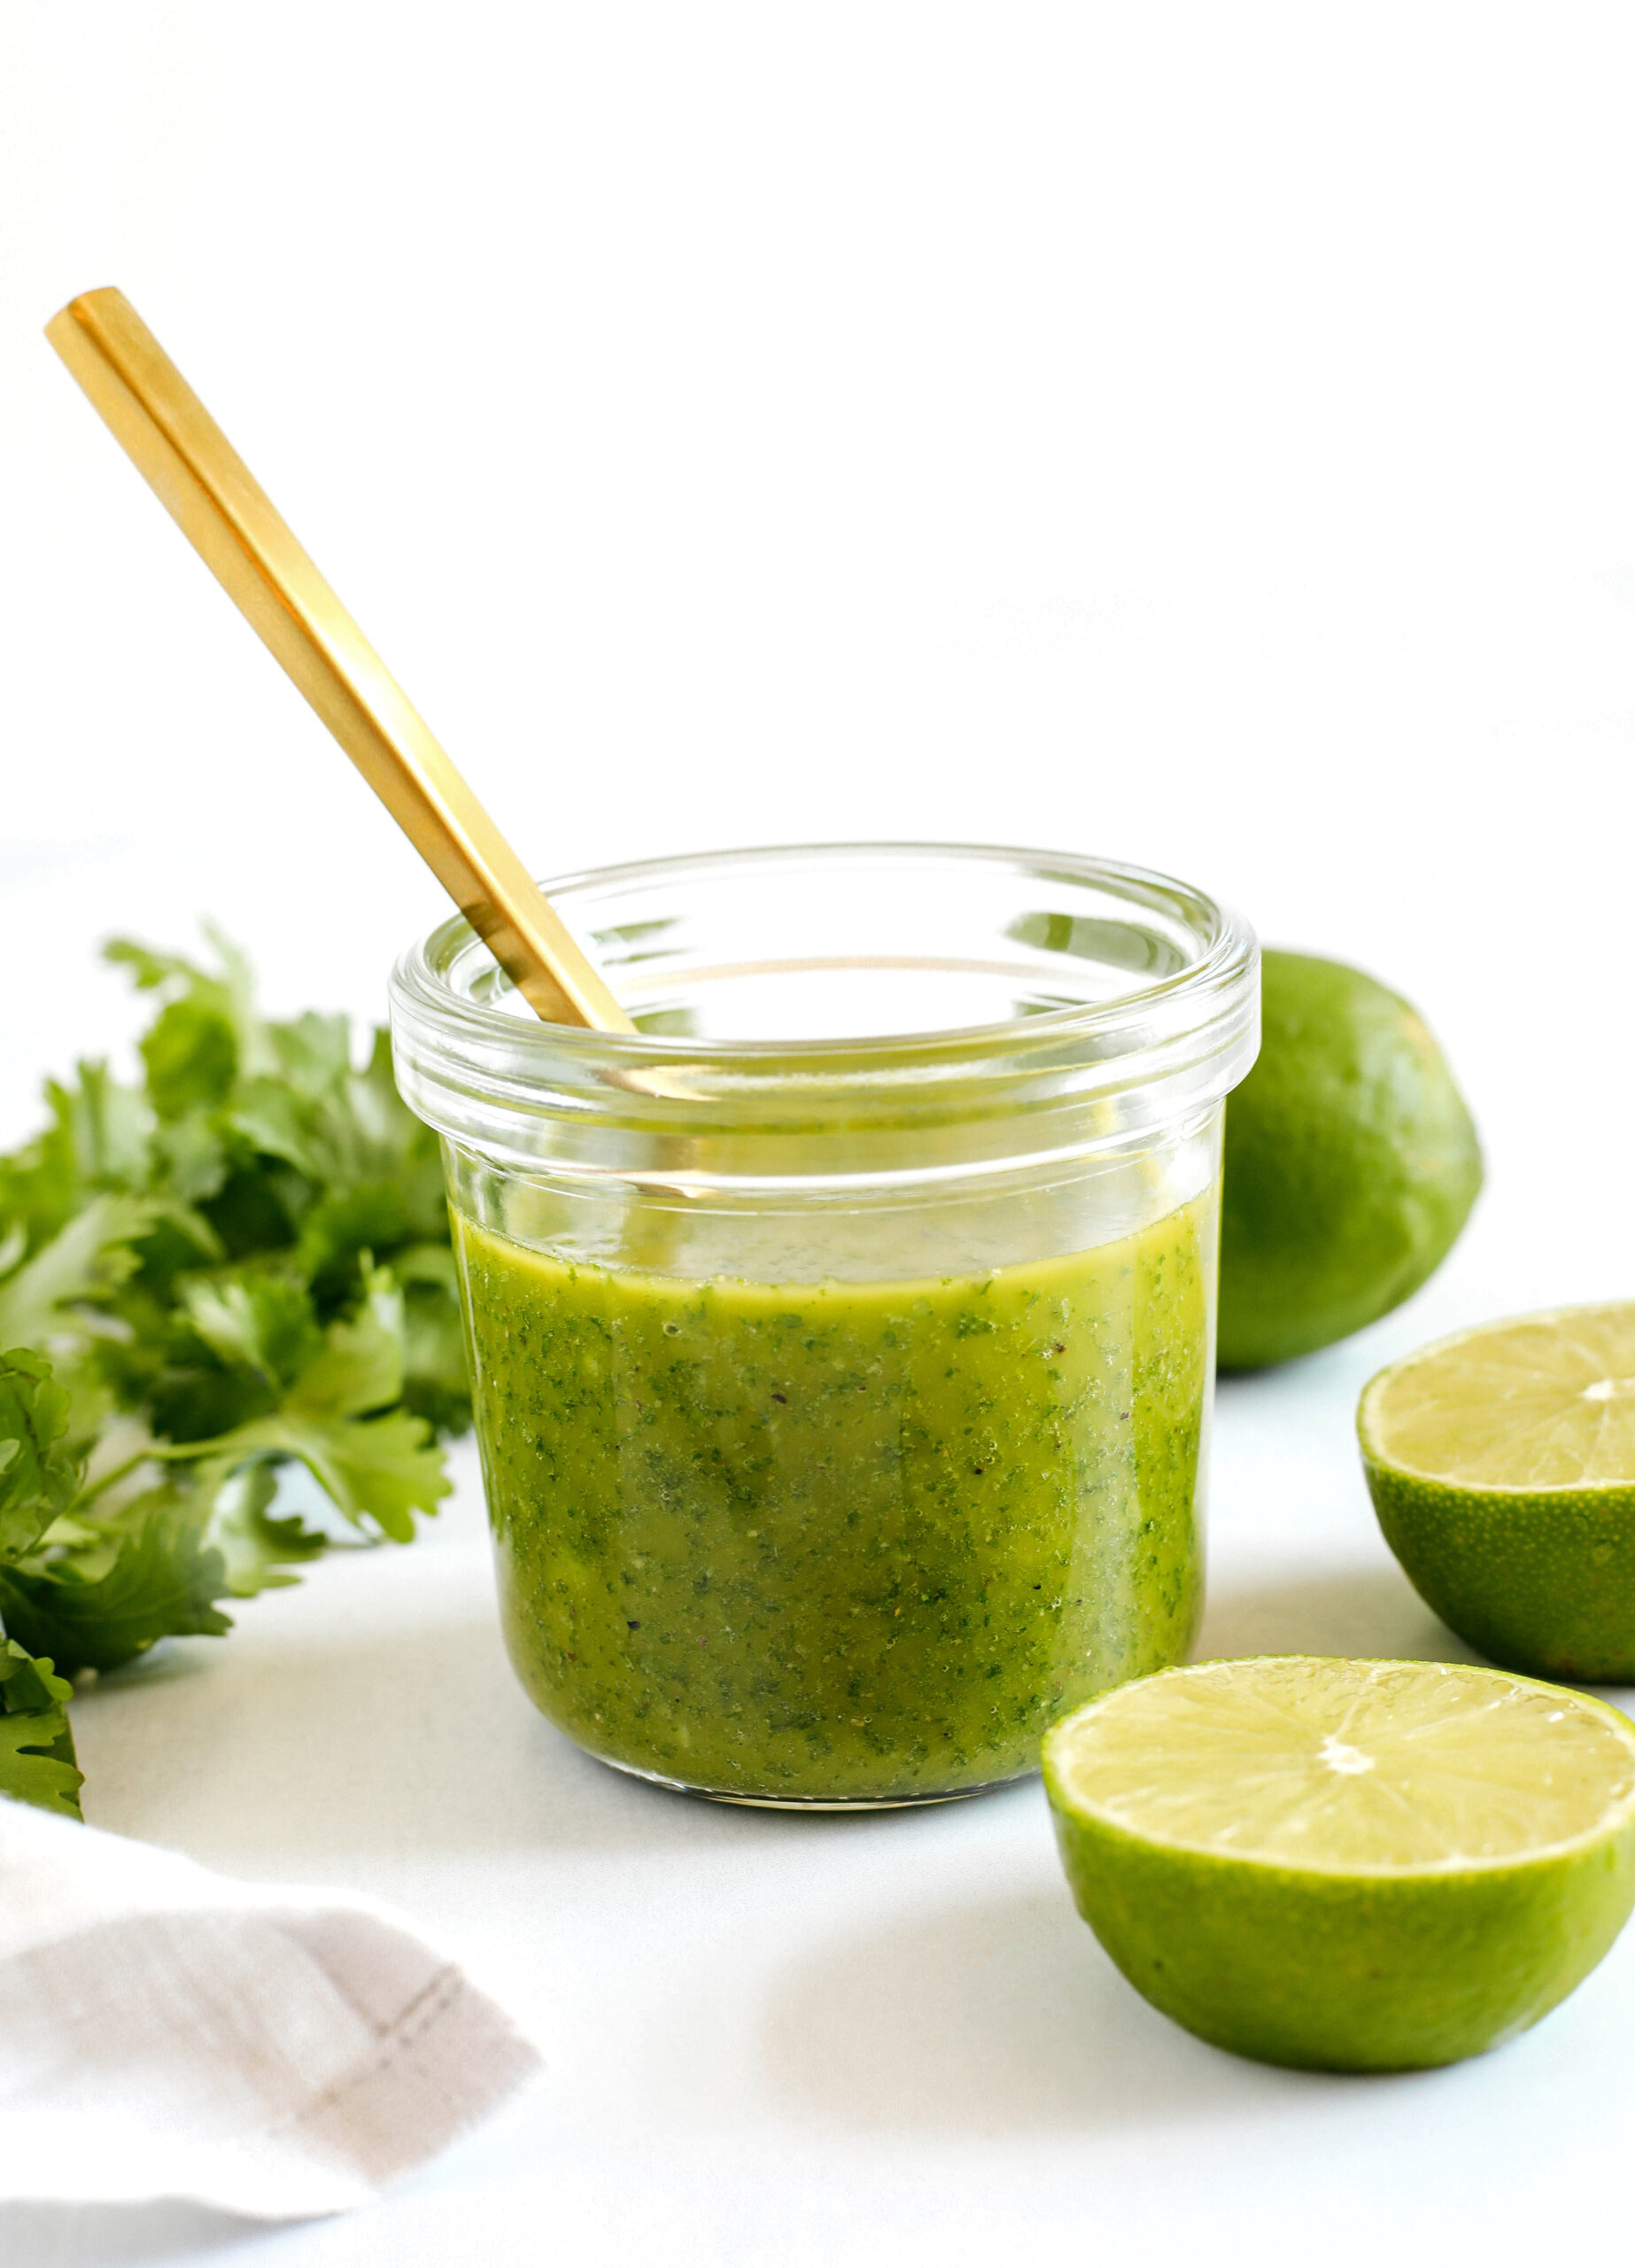 Bright and tangy Cilantro Lime Dressing made with fresh ingredients and easily thrown together in just 5 minutes with so much flavor!  Perfect for salads, veggies, chicken, fish, tacos and more!